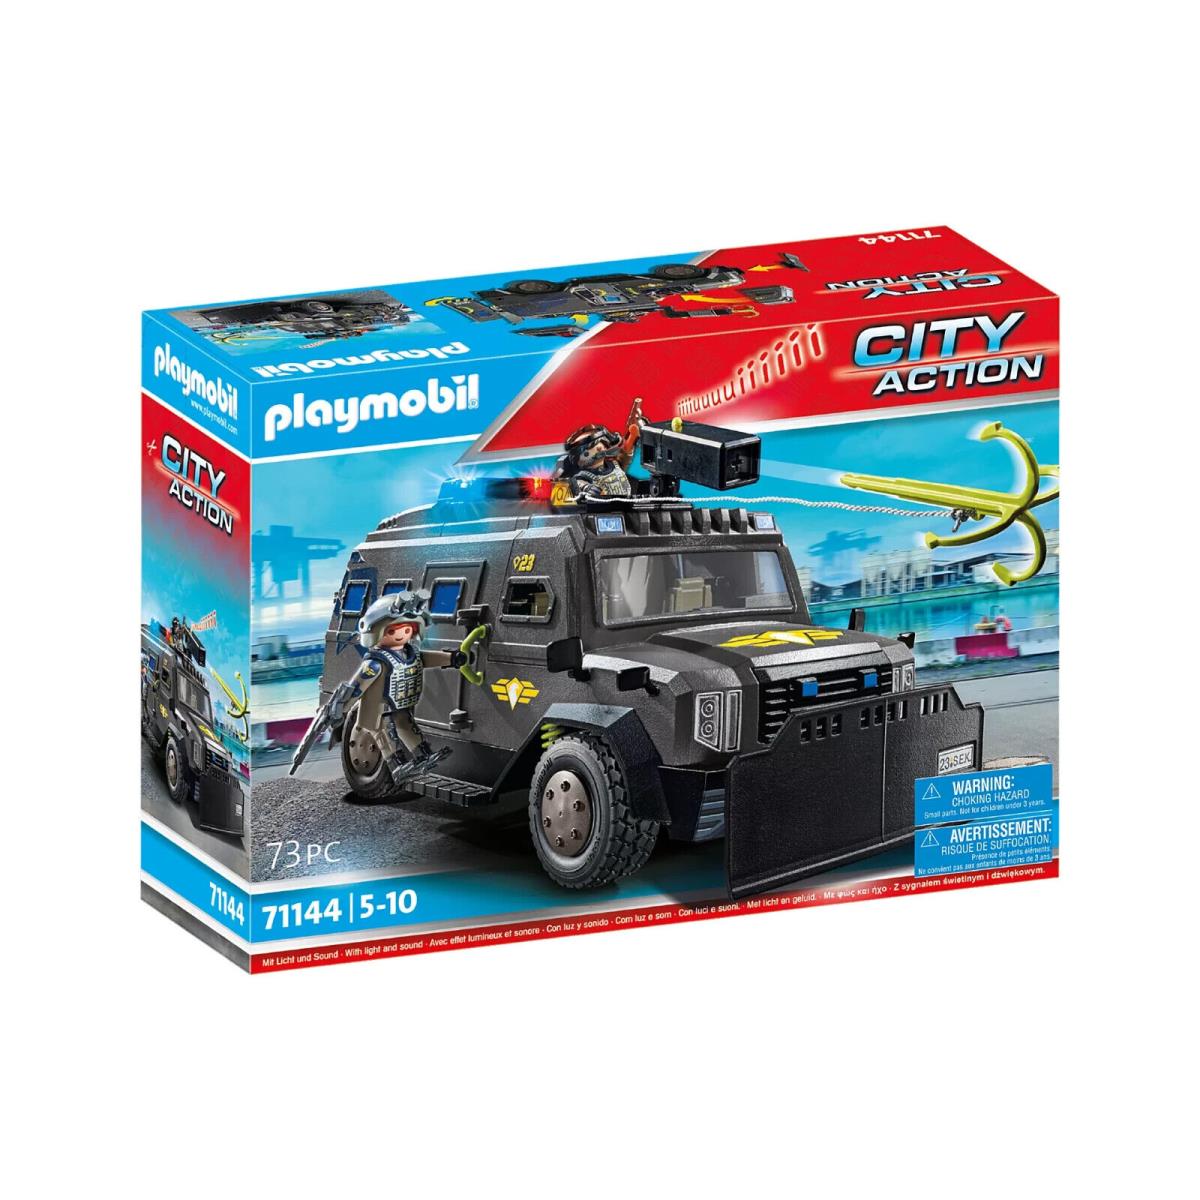 Playmobil City Action 71144 Tactical Police: All-terrain Vehicle Mib/new